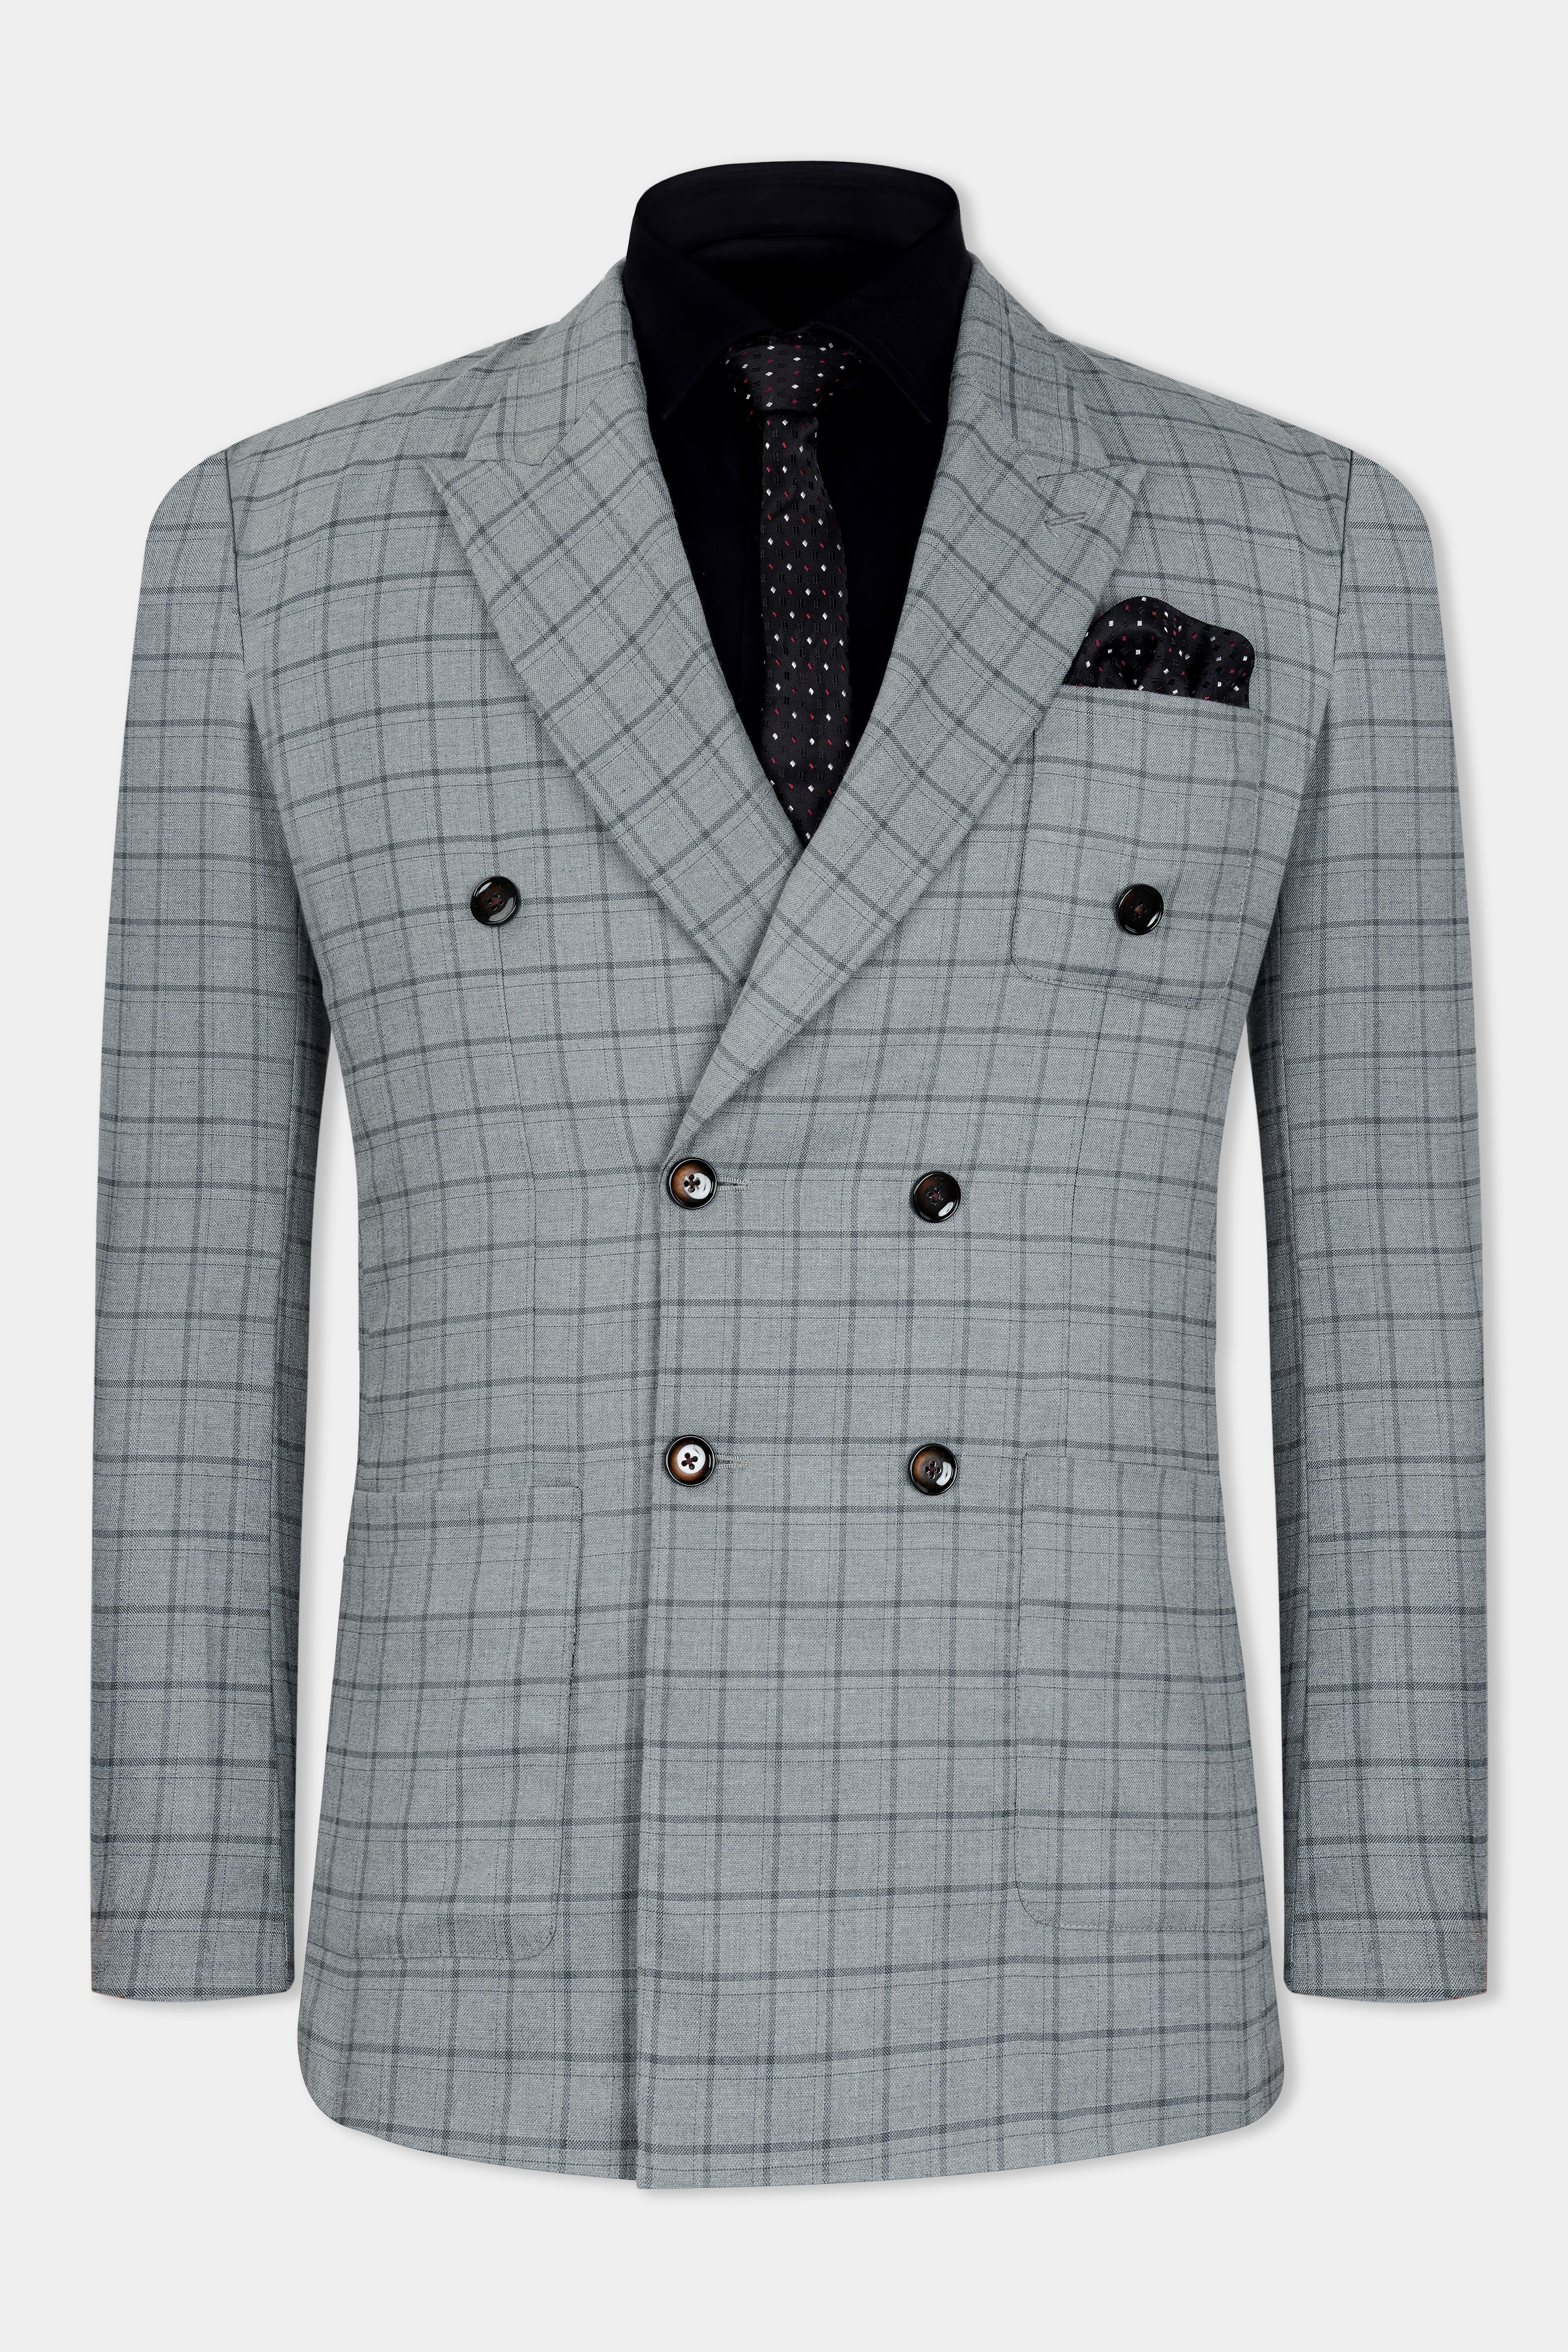 Boulder Gray Checkered Wool Rich Double Breasted Blazer BL2930-DB-PP-36, BL2930-DB-PP-38, BL2930-DB-PP-40, BL2930-DB-PP-42, BL2930-DB-PP-44, BL2930-DB-PP-46, BL2930-DB-PP-48, BL2930-DB-PP-50, BL2930-DB-PP-52, BL2930-DB-PP-54, BL2930-DB-PP-56, BL2930-DB-PP-58, BL2930-DB-PP-60